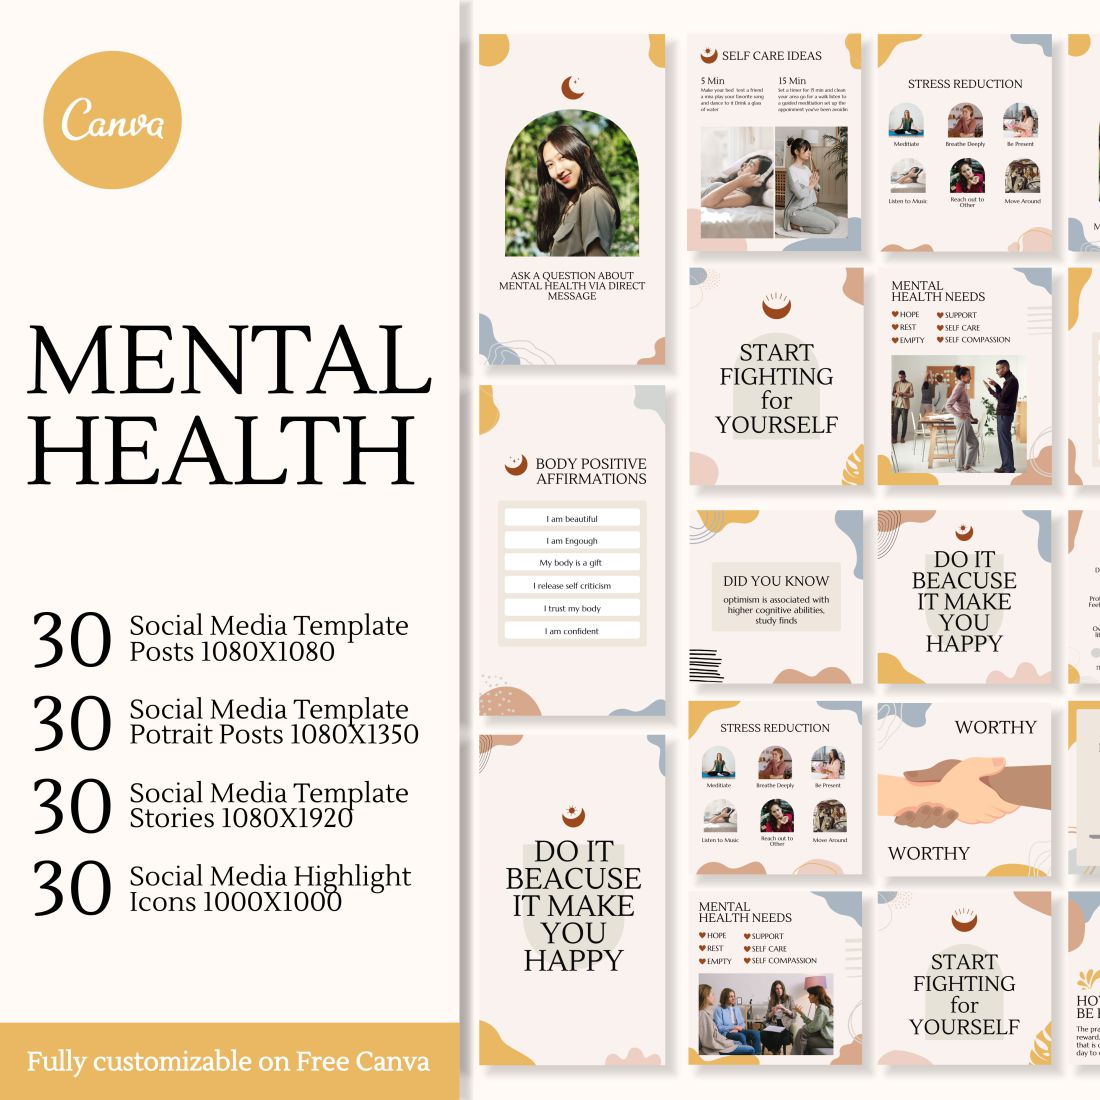 Social Media Template For Mental Health Cover Image.